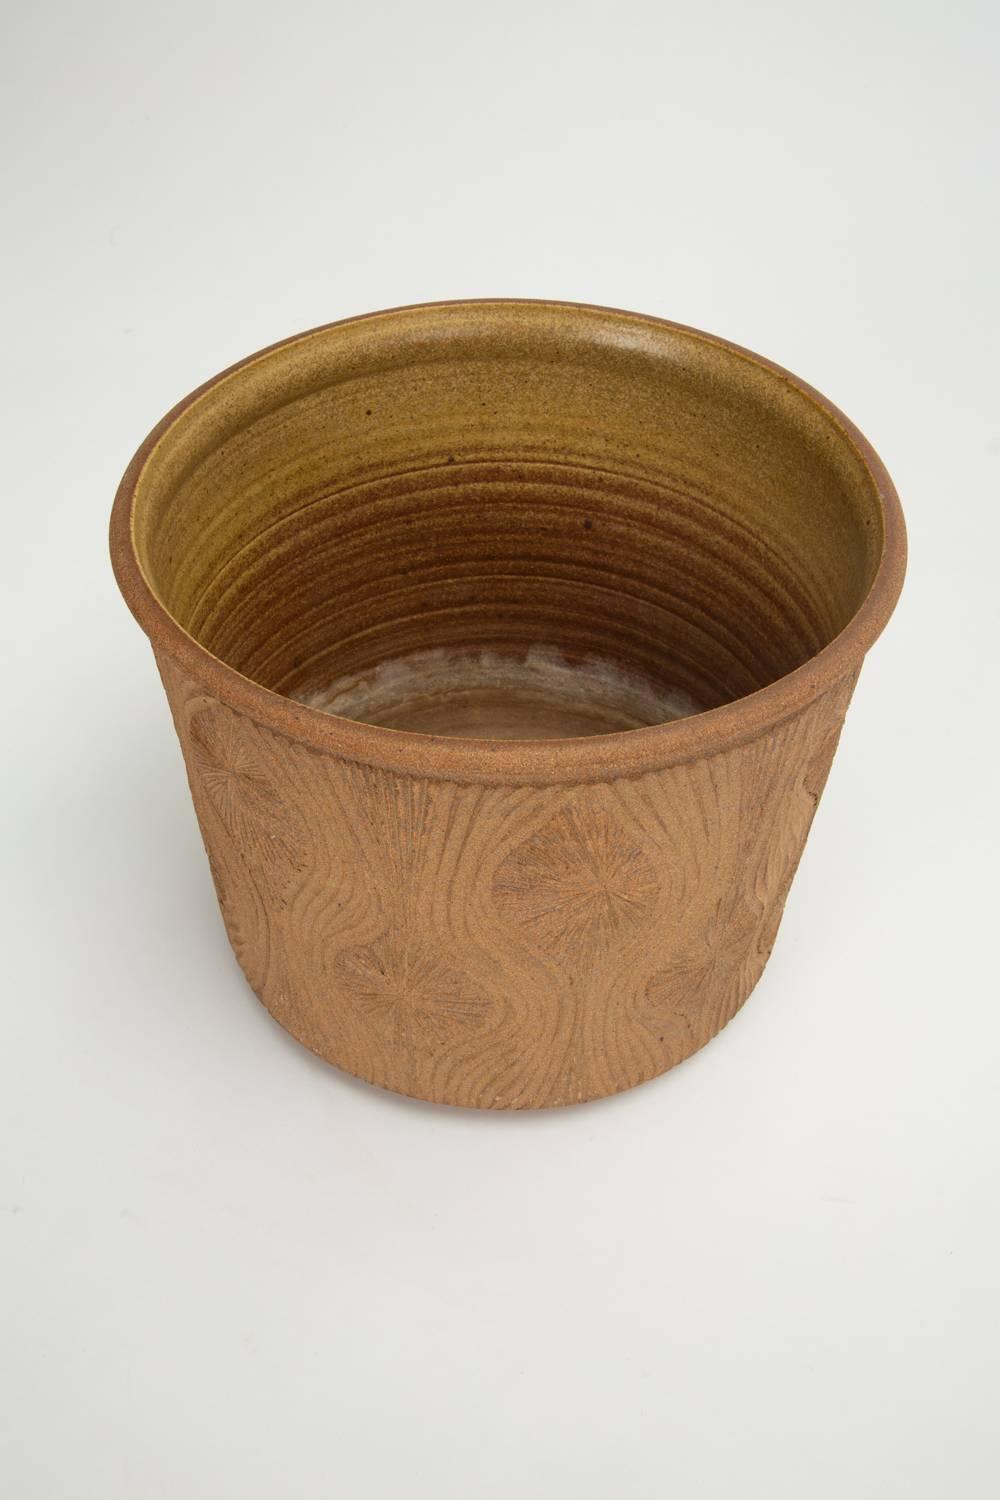 A 1970s handmade studio pottery planter by California ceramics artist Robert Maxwell. This example has a notched lip and cylindrical shape. It is hand incised with a Maxwell signature “teardrop sunburst” design. The interior of the planter is glazed